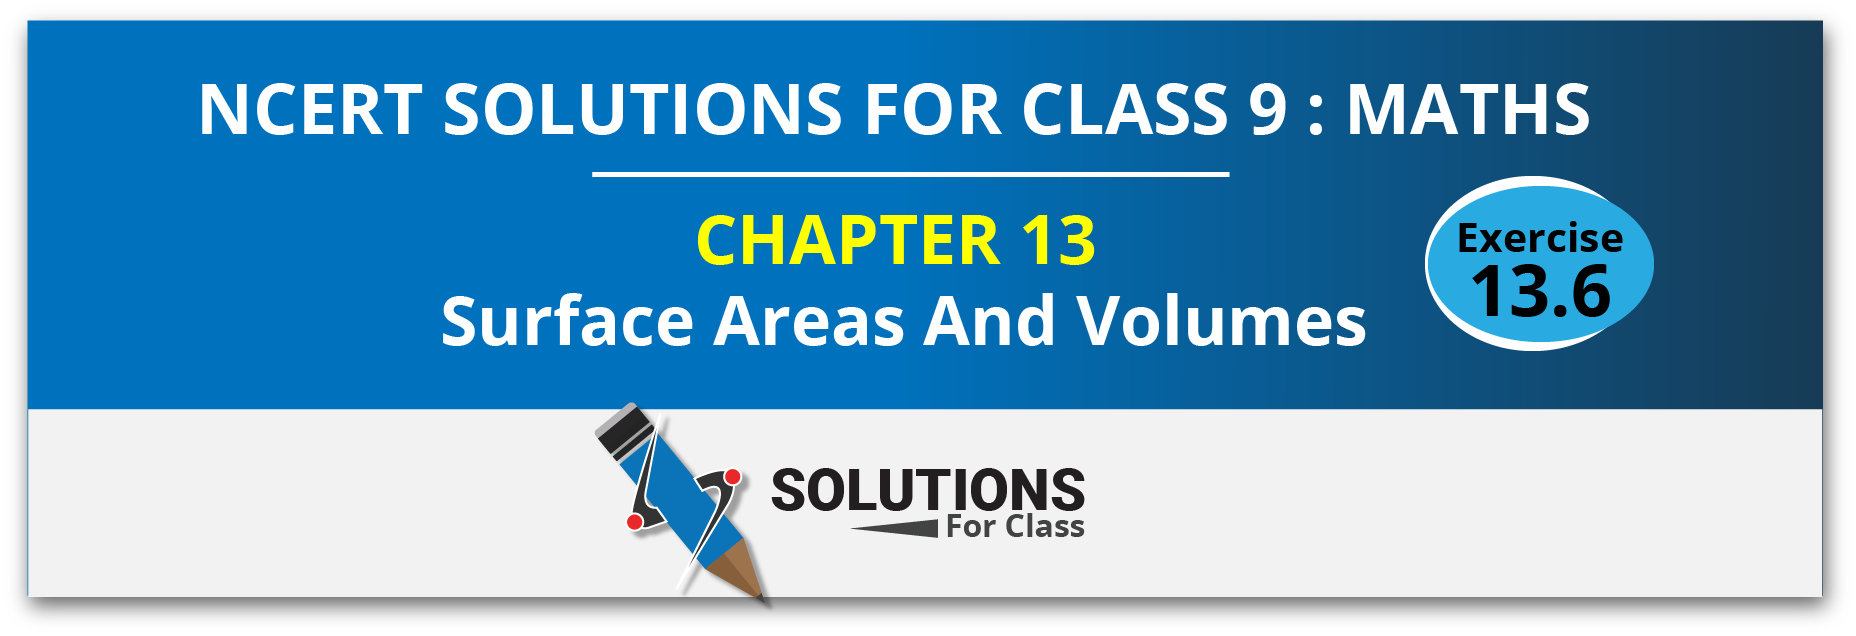 NCERT Solution For Class 9, Maths, Chapter 13, Surface Areas And Volumes, Exercise 13.6